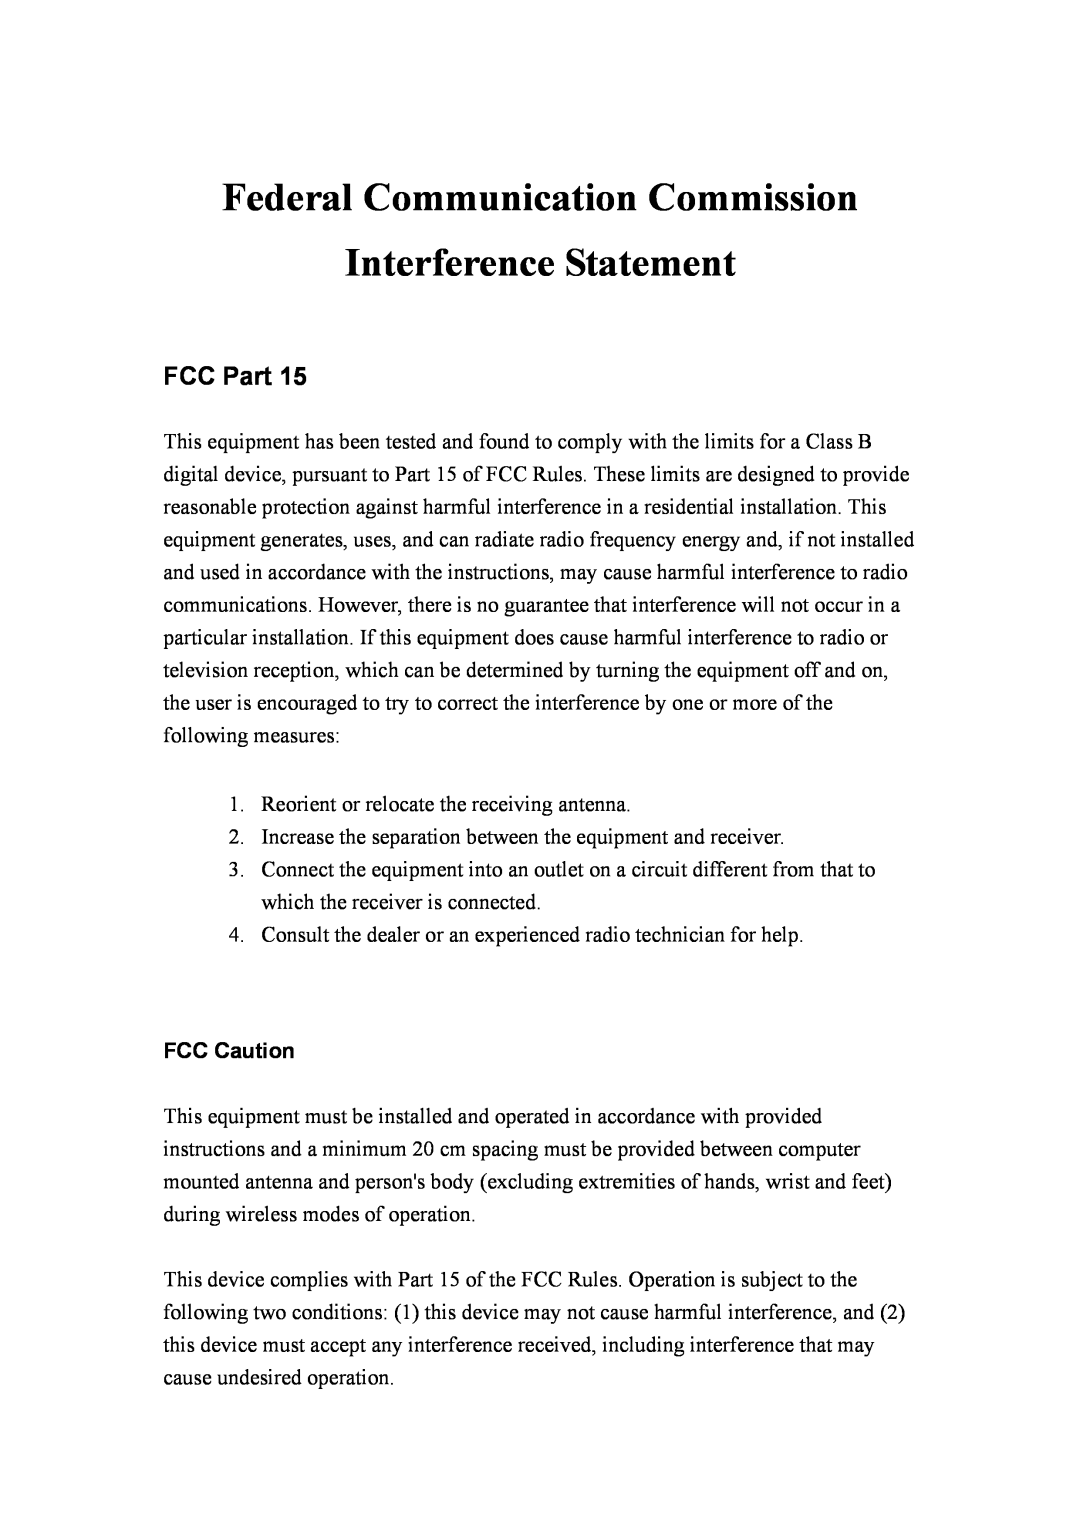 Intellinet Network Solutions INT-524315-UM-0808-1 Federal Communication Commission Interference Statement, FCC Part 